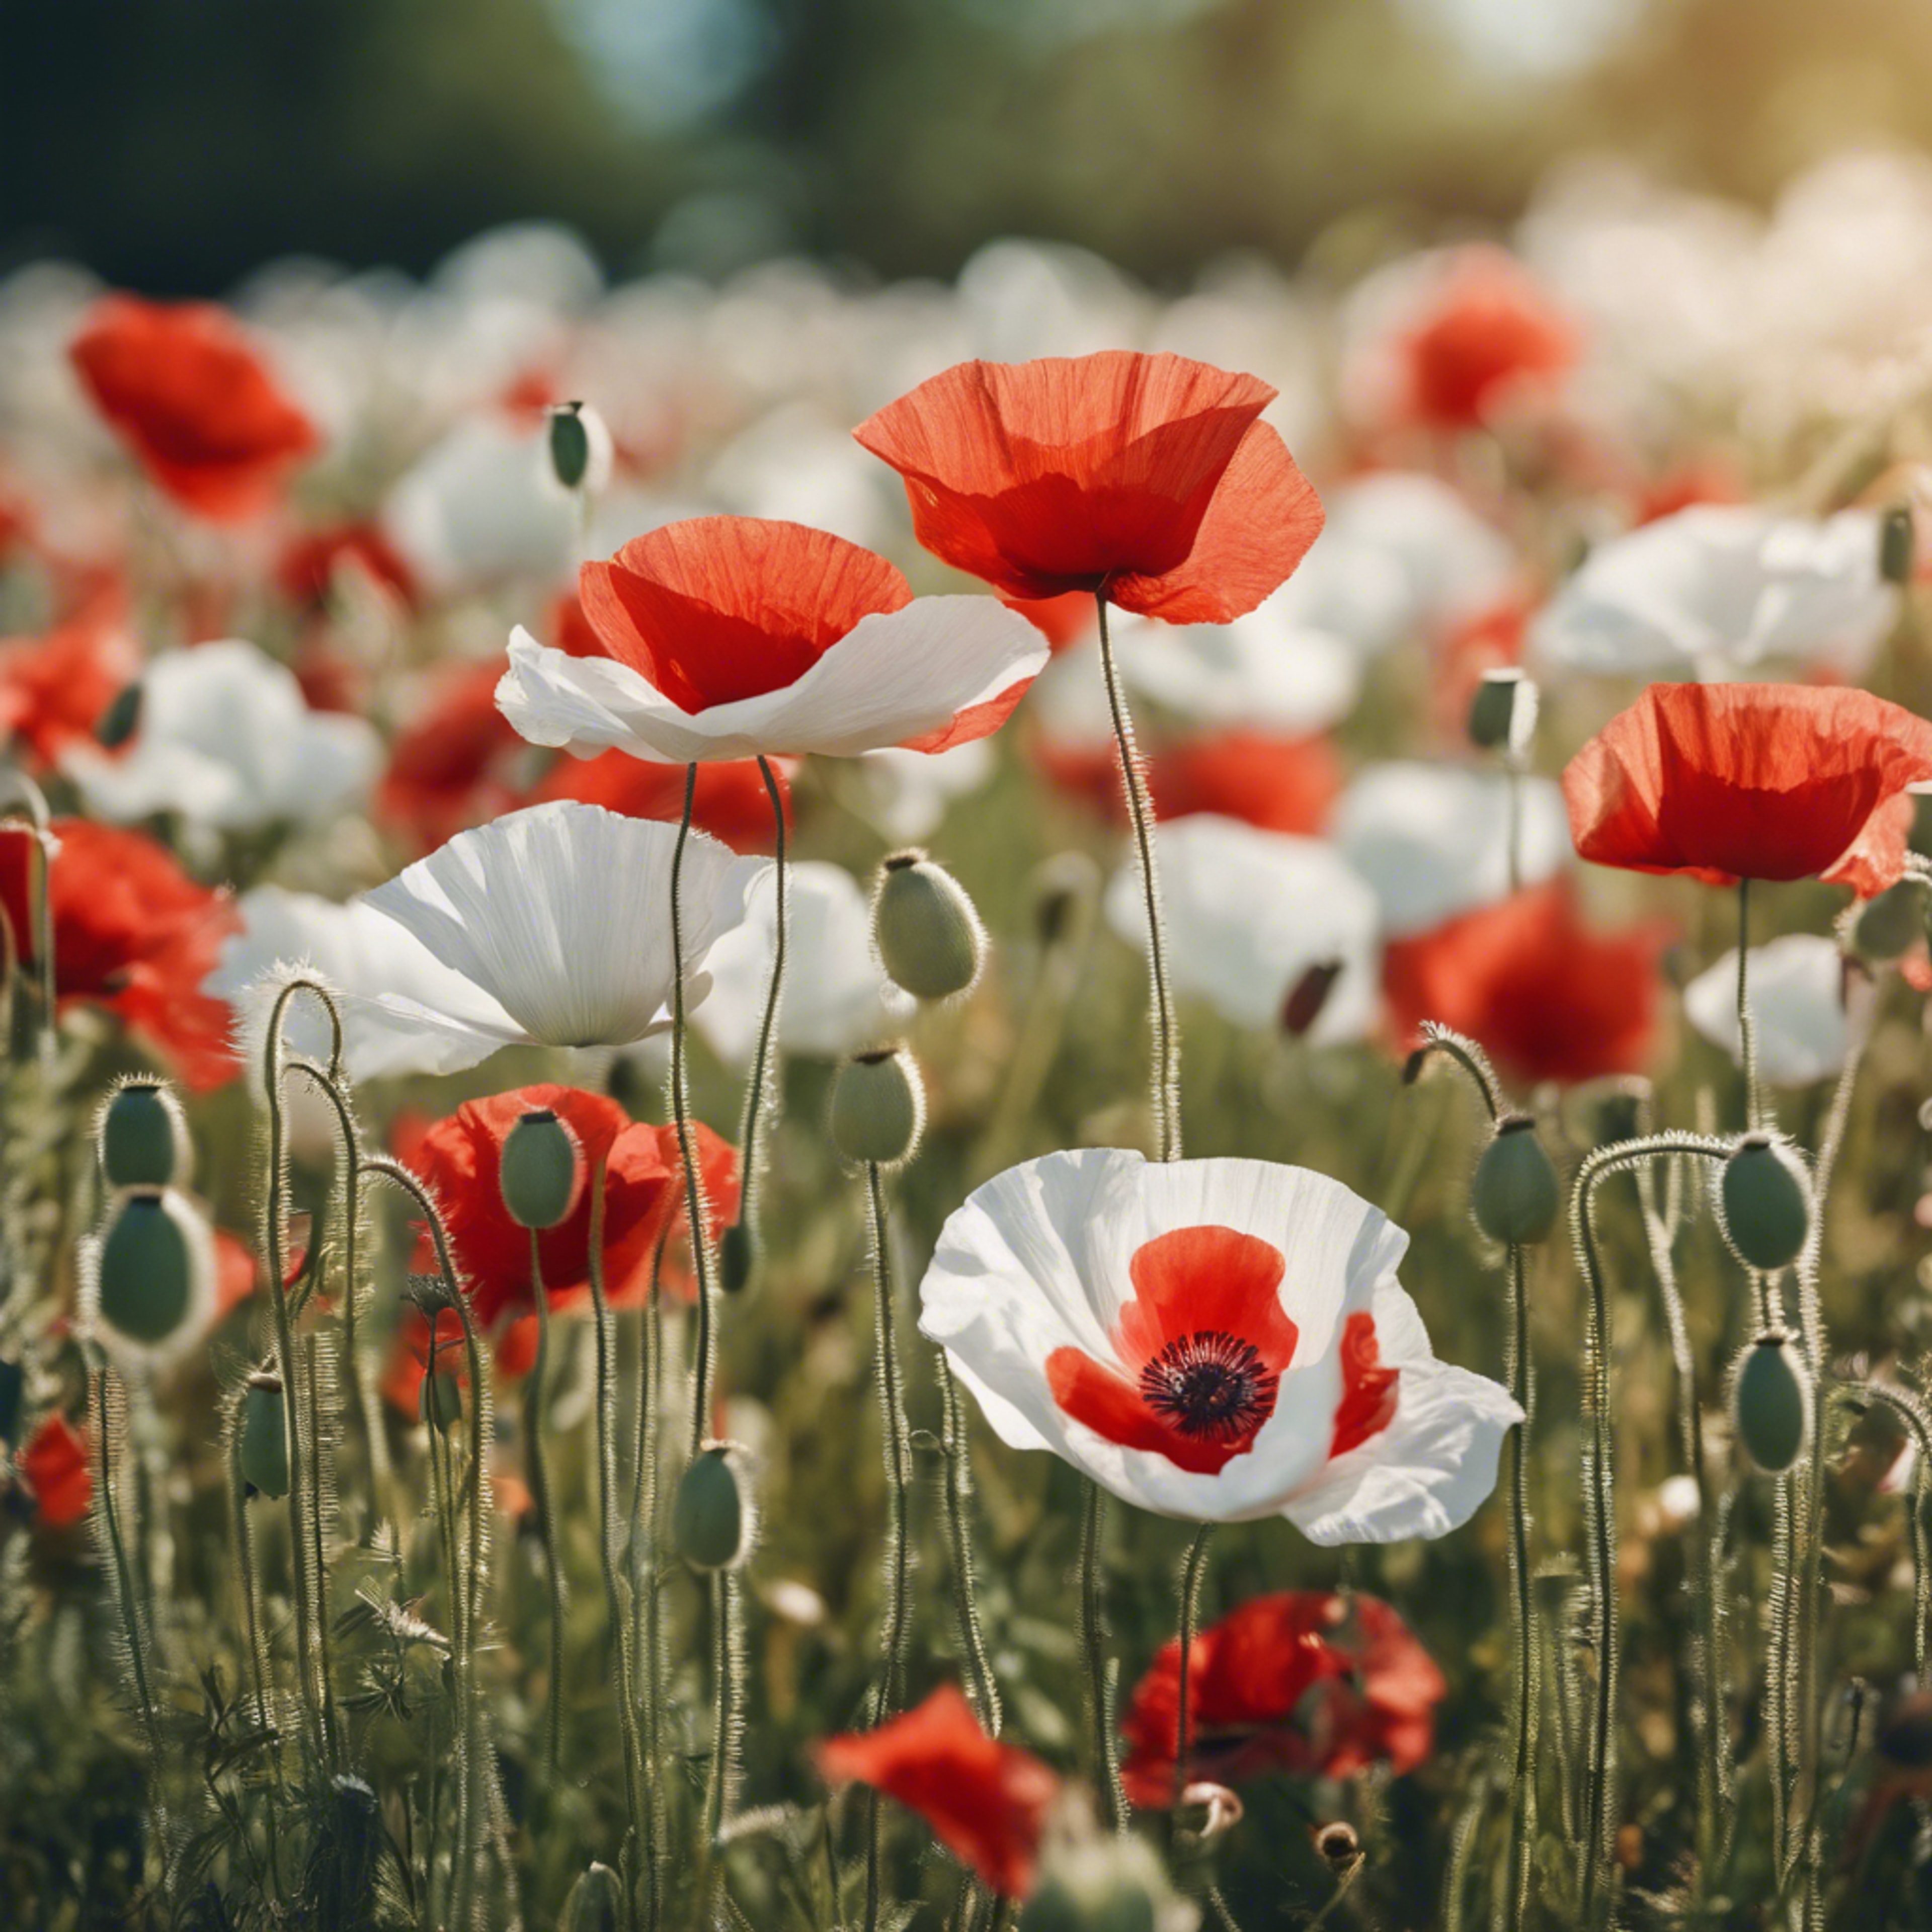 A patch of vibrant red and white poppy flowers in a summer meadow. Дэлгэцийн зураг[6e8905720b3f496680eb]